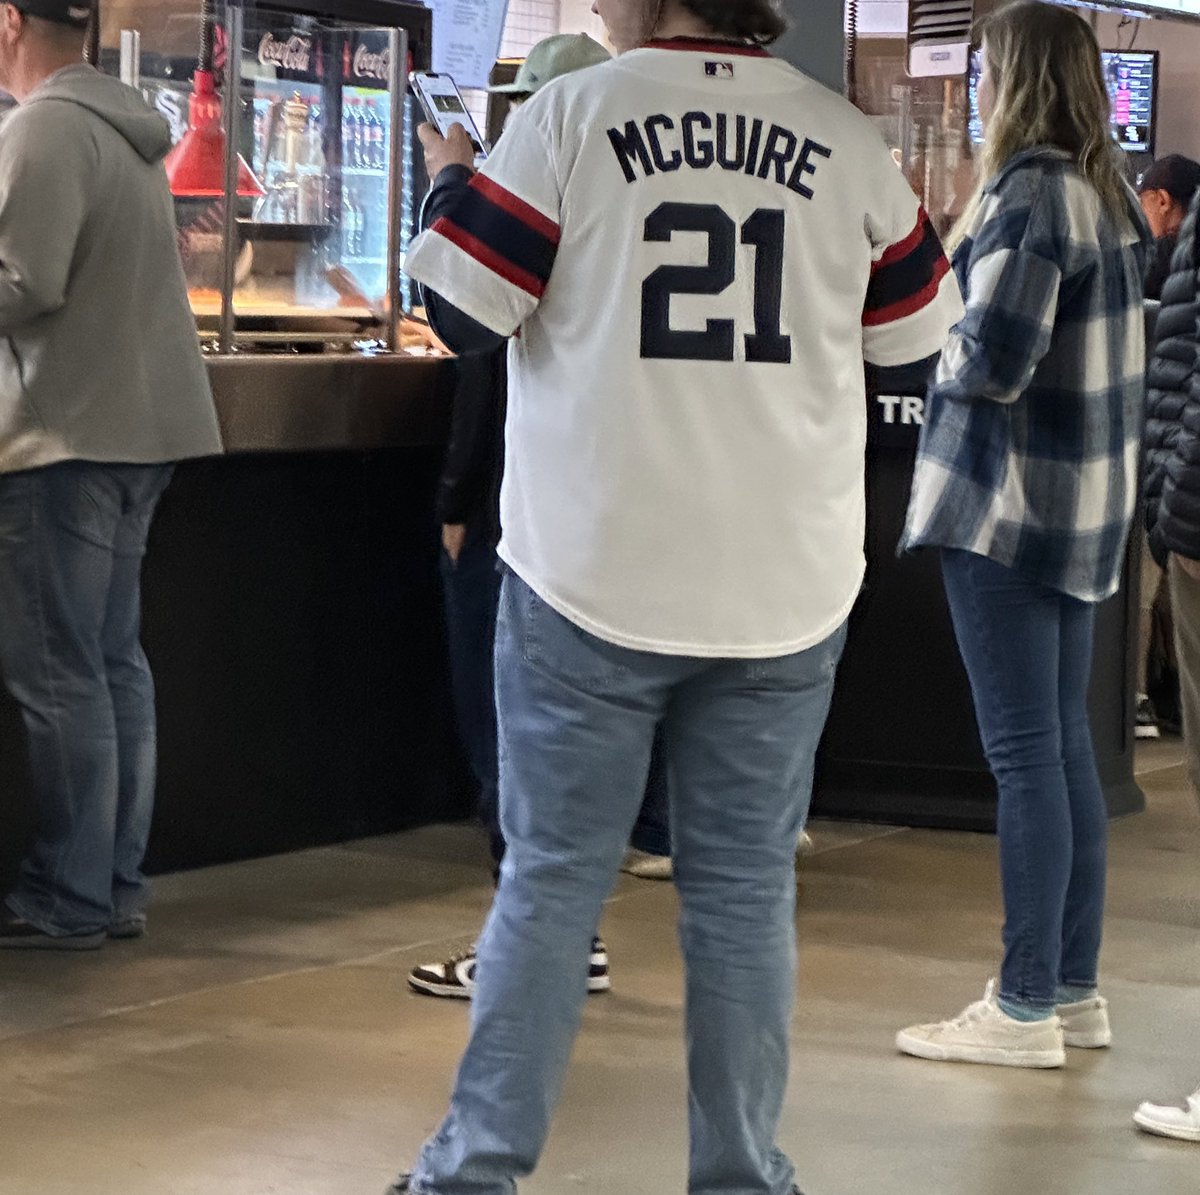 If I had $17 for every Reese McGuire jersey I’ve seen today, I could buy a Campfire Milkshake.